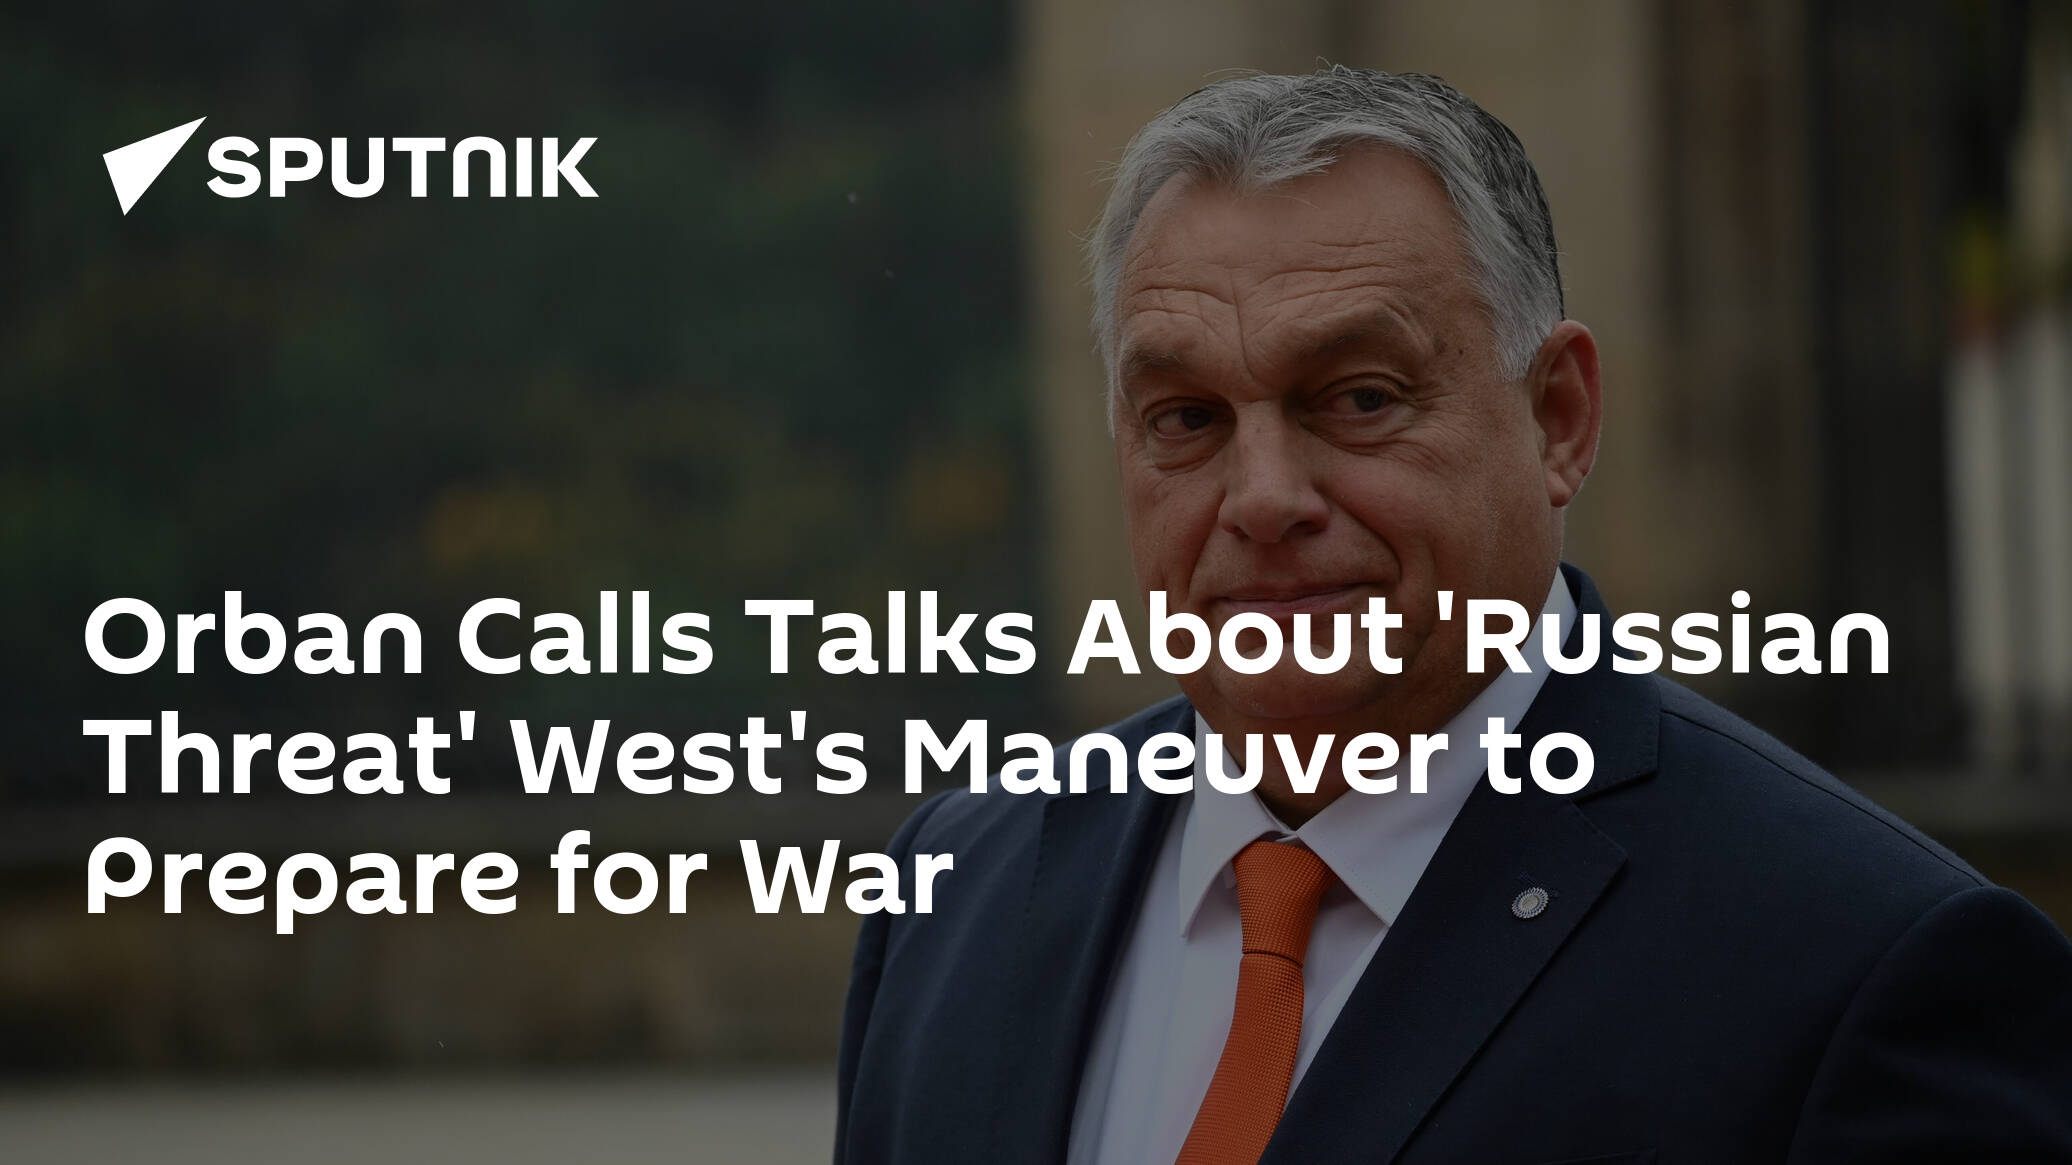 Orban Calls Talks About 'Russian Threat' West's Maneuver to Prepare